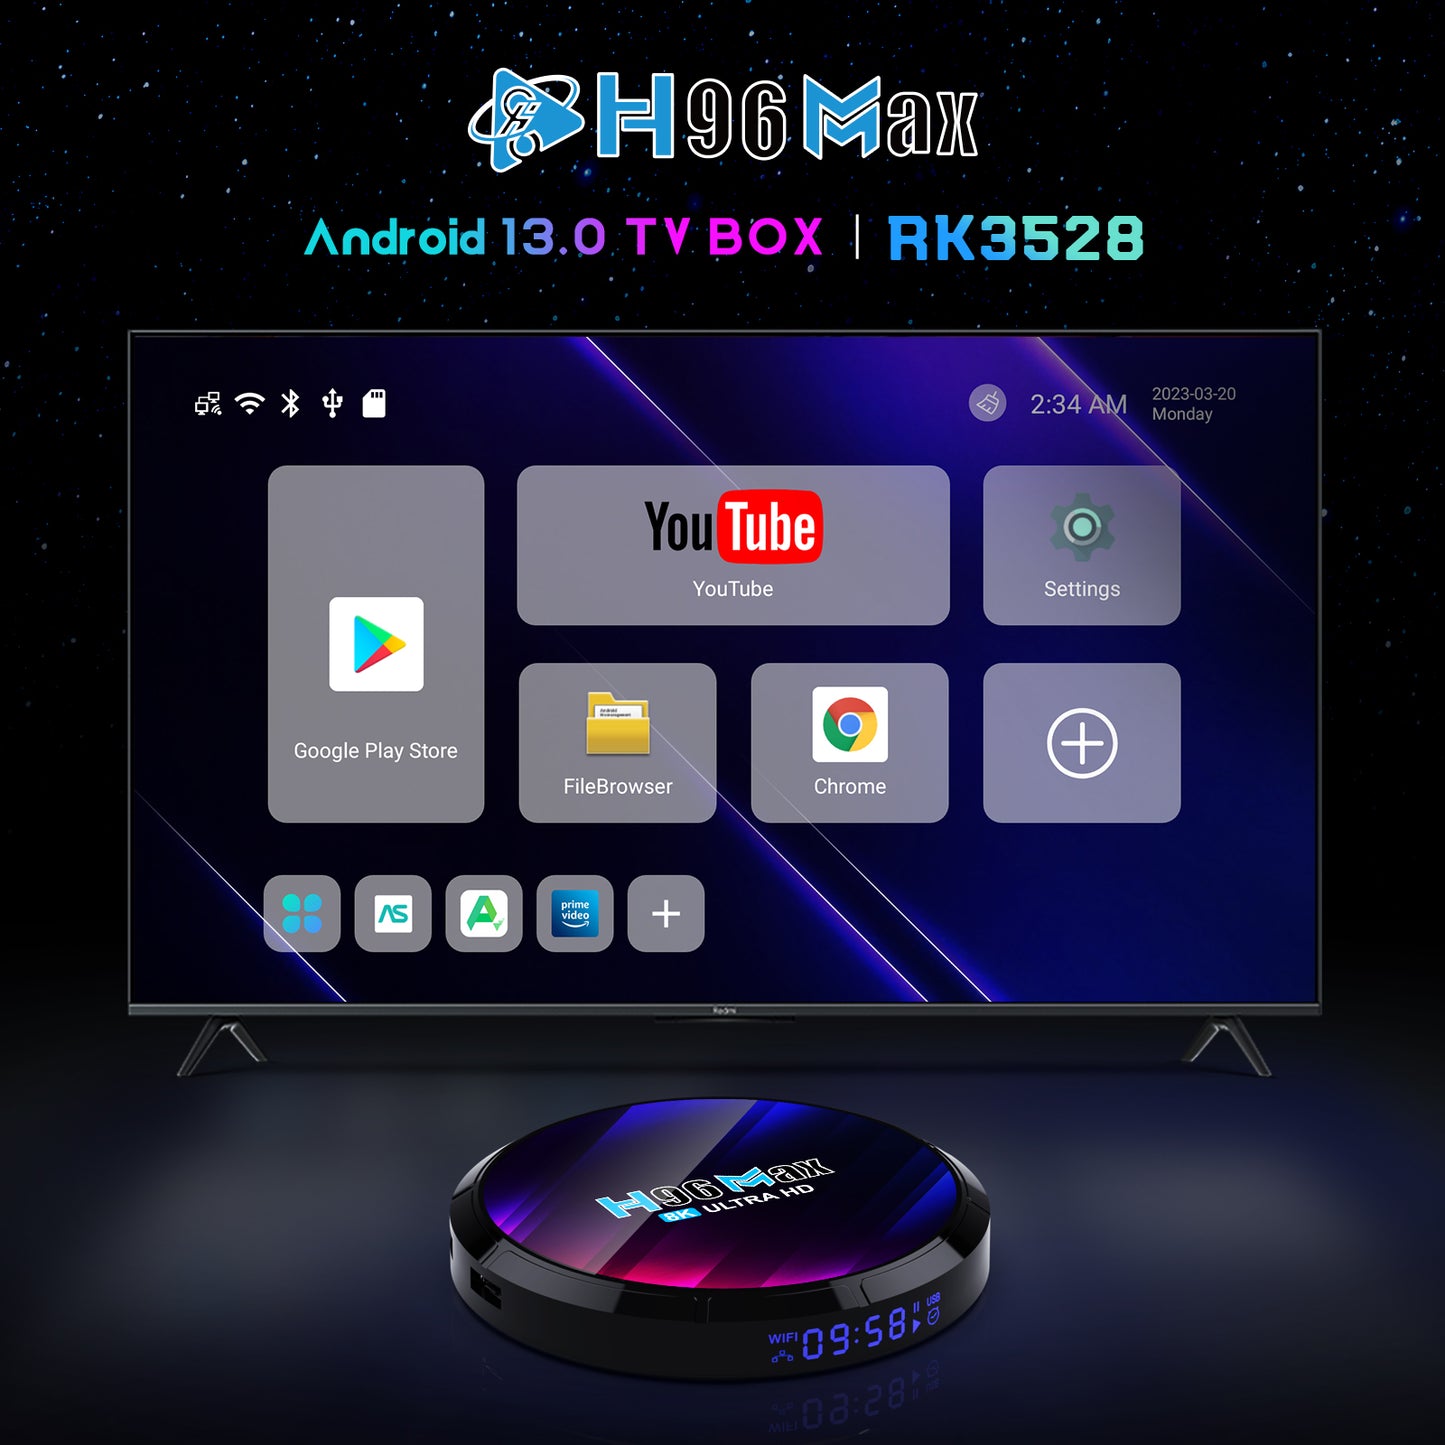 Android 13 TV Box H96 Max 4GB RAM, 64GB ROM, RK3528 (Smart TV Console)